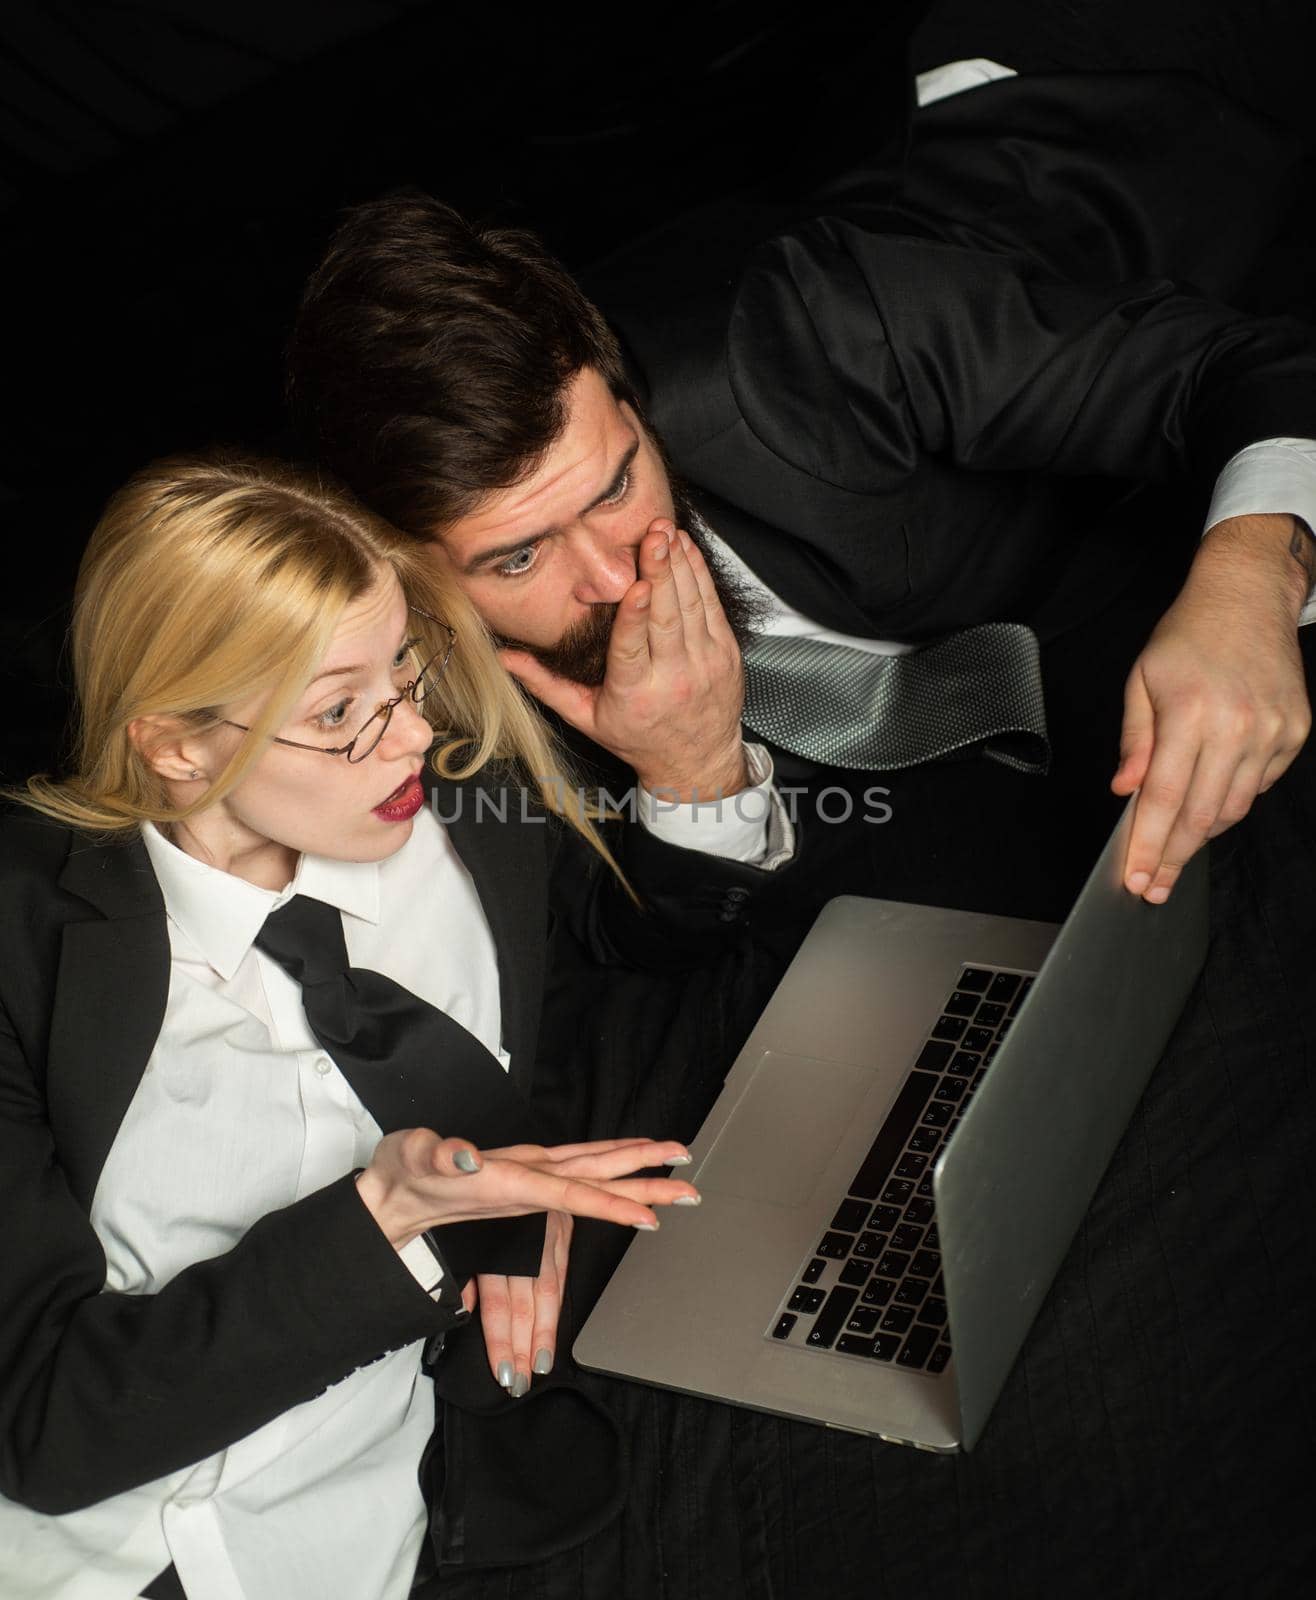 Two business partners working with laptop together.Beautiful young business woman and handsome businessman in formal suits are using a laptop. by Tverdokhlib